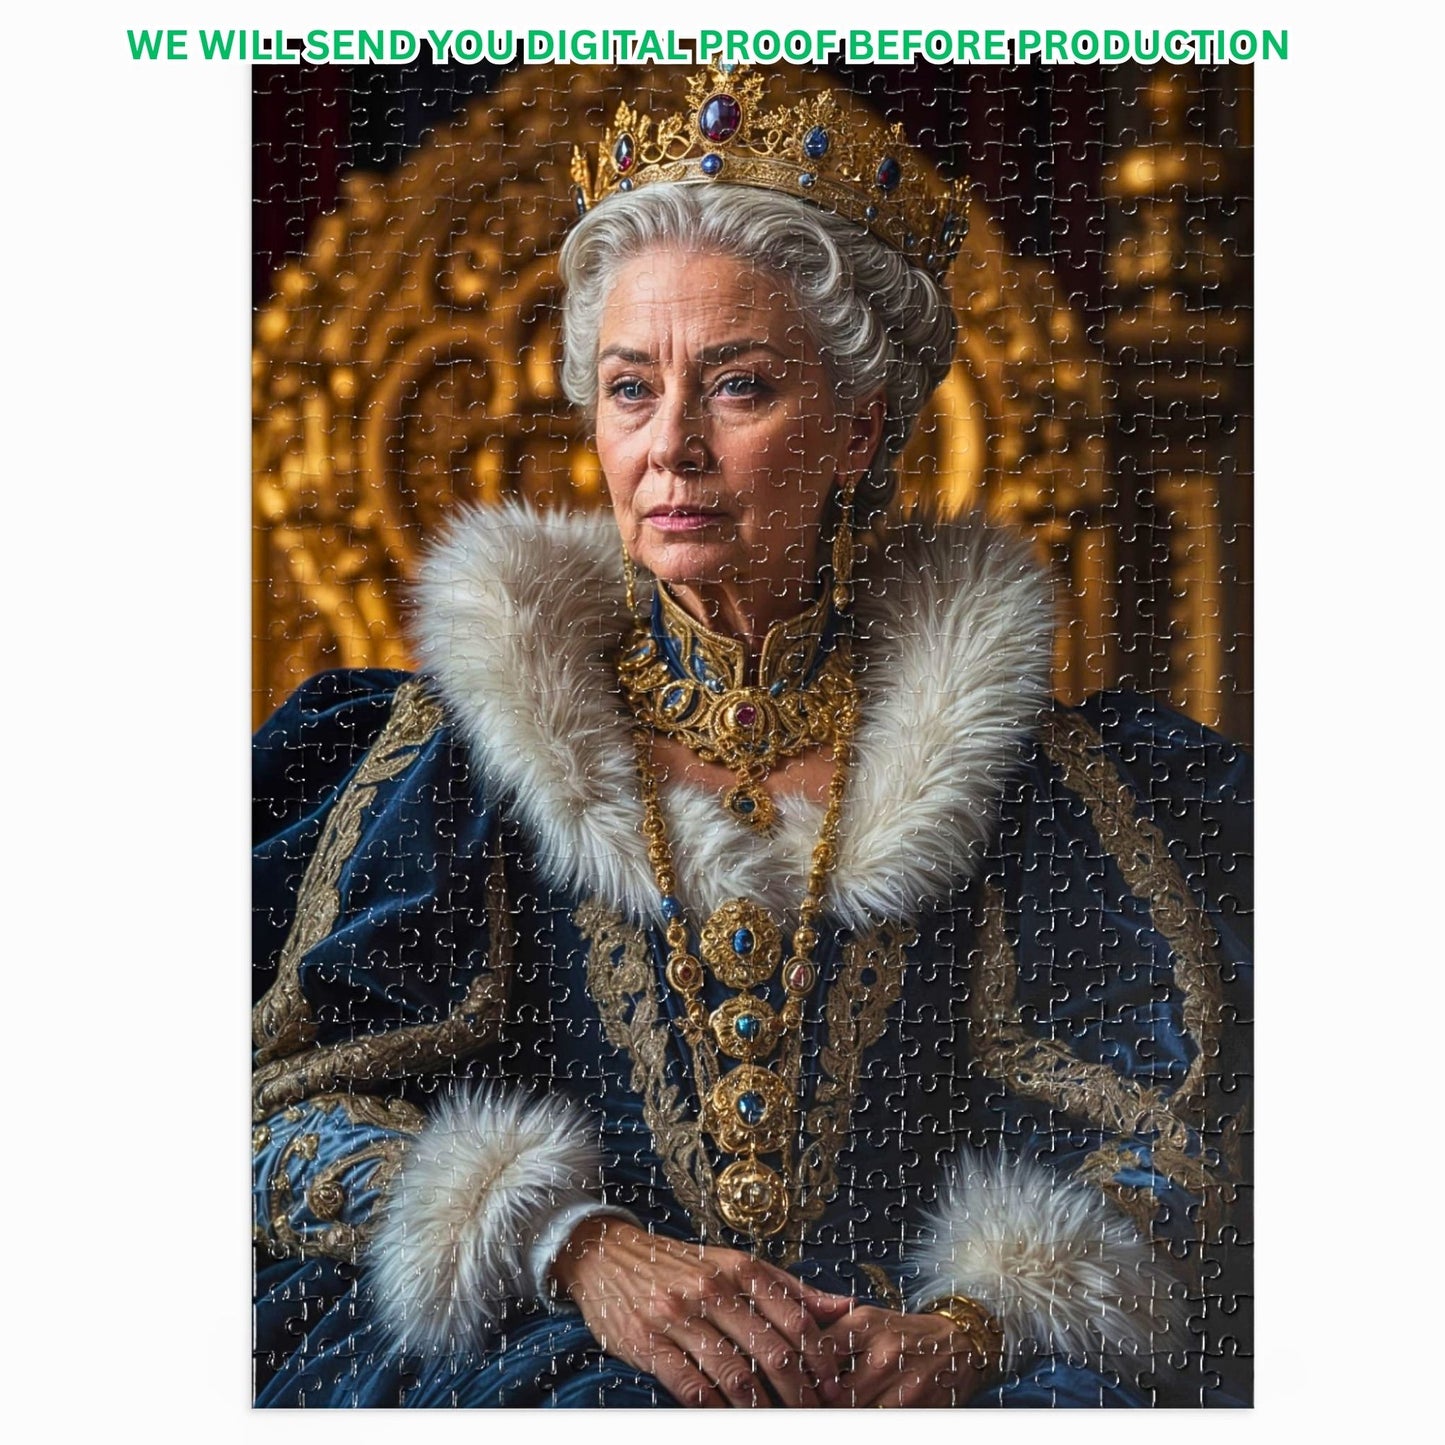 Step into the world of custom puzzles with our Royal Portrait transformations! Perfect for any occasion, from birthdays to special surprises, these Renaissance-inspired puzzles and personalized queen portraits make for unforgettable gifts. Explore AI-crafted historical puzzle art and enjoy easy digital downloads. Delight in custom female puzzle designs that blend elegance and personalization, perfect for showcasing your unique style and creativity.